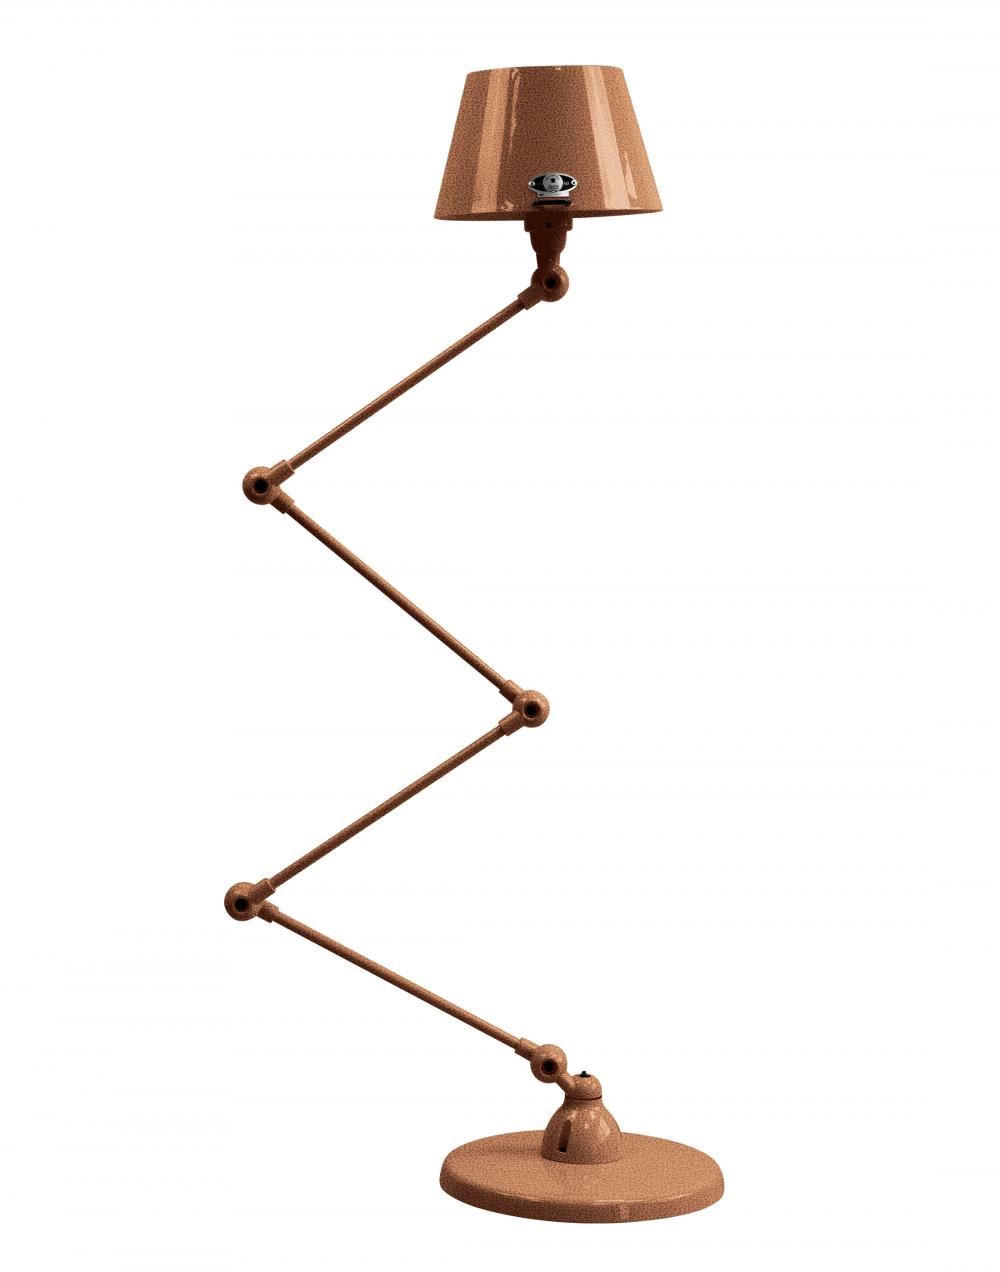 Jielde Aicler Zigzag 4 Arm Desk Or Floor Light Straight Shade Copper Hammered Gloss